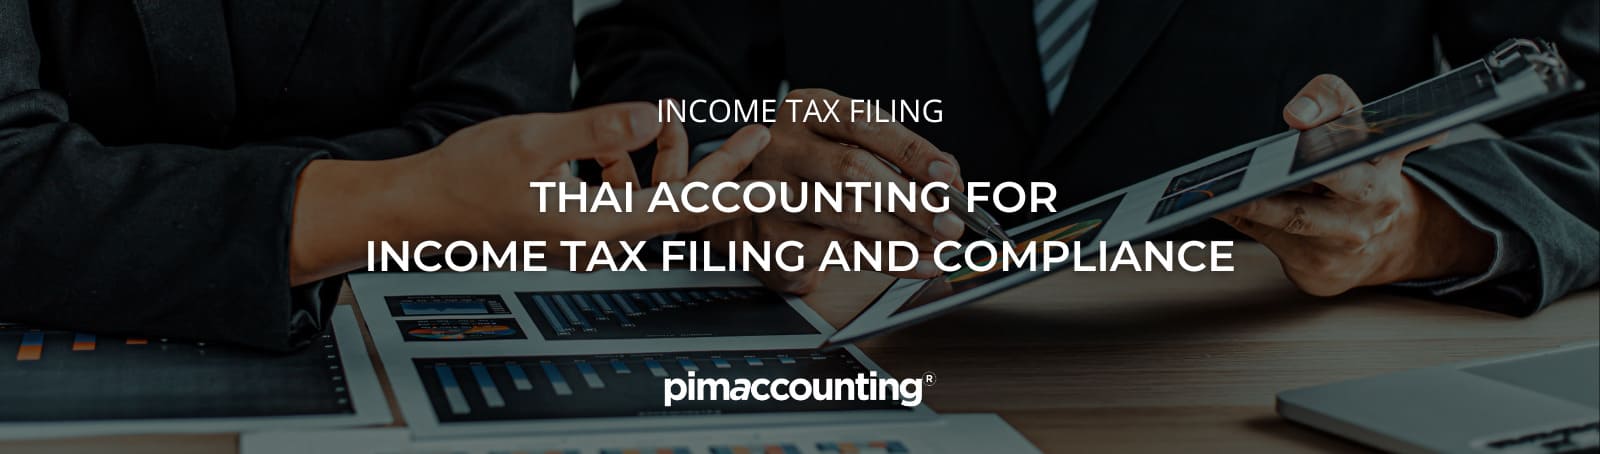 Thai Accounting for Income Tax Filing and Compliance